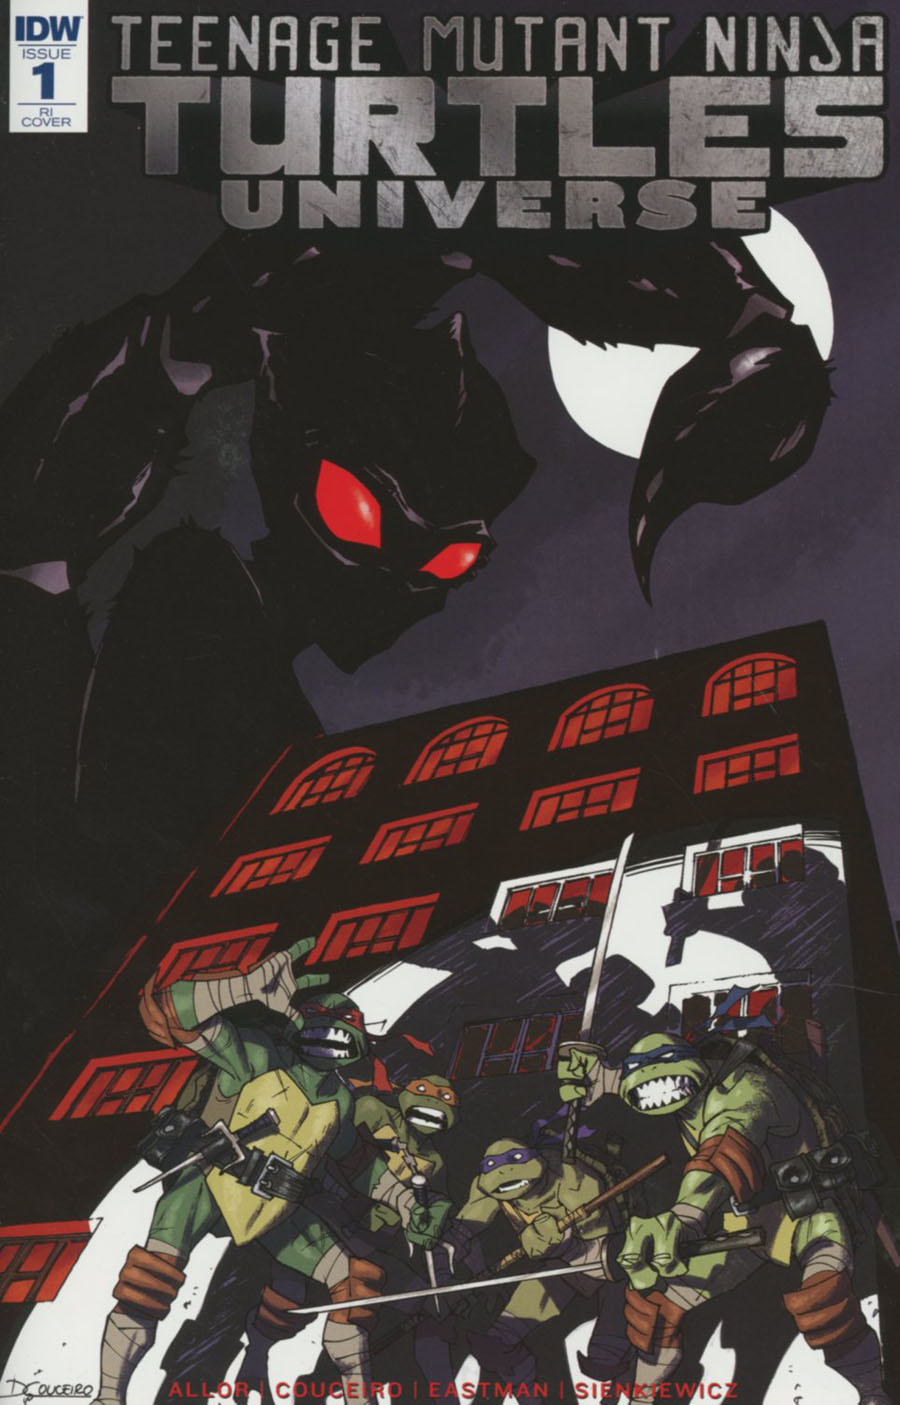 Teenage Mutant Ninja Turtles Universe #1 Cover D Incentive Damian Couceiro Variant Cover